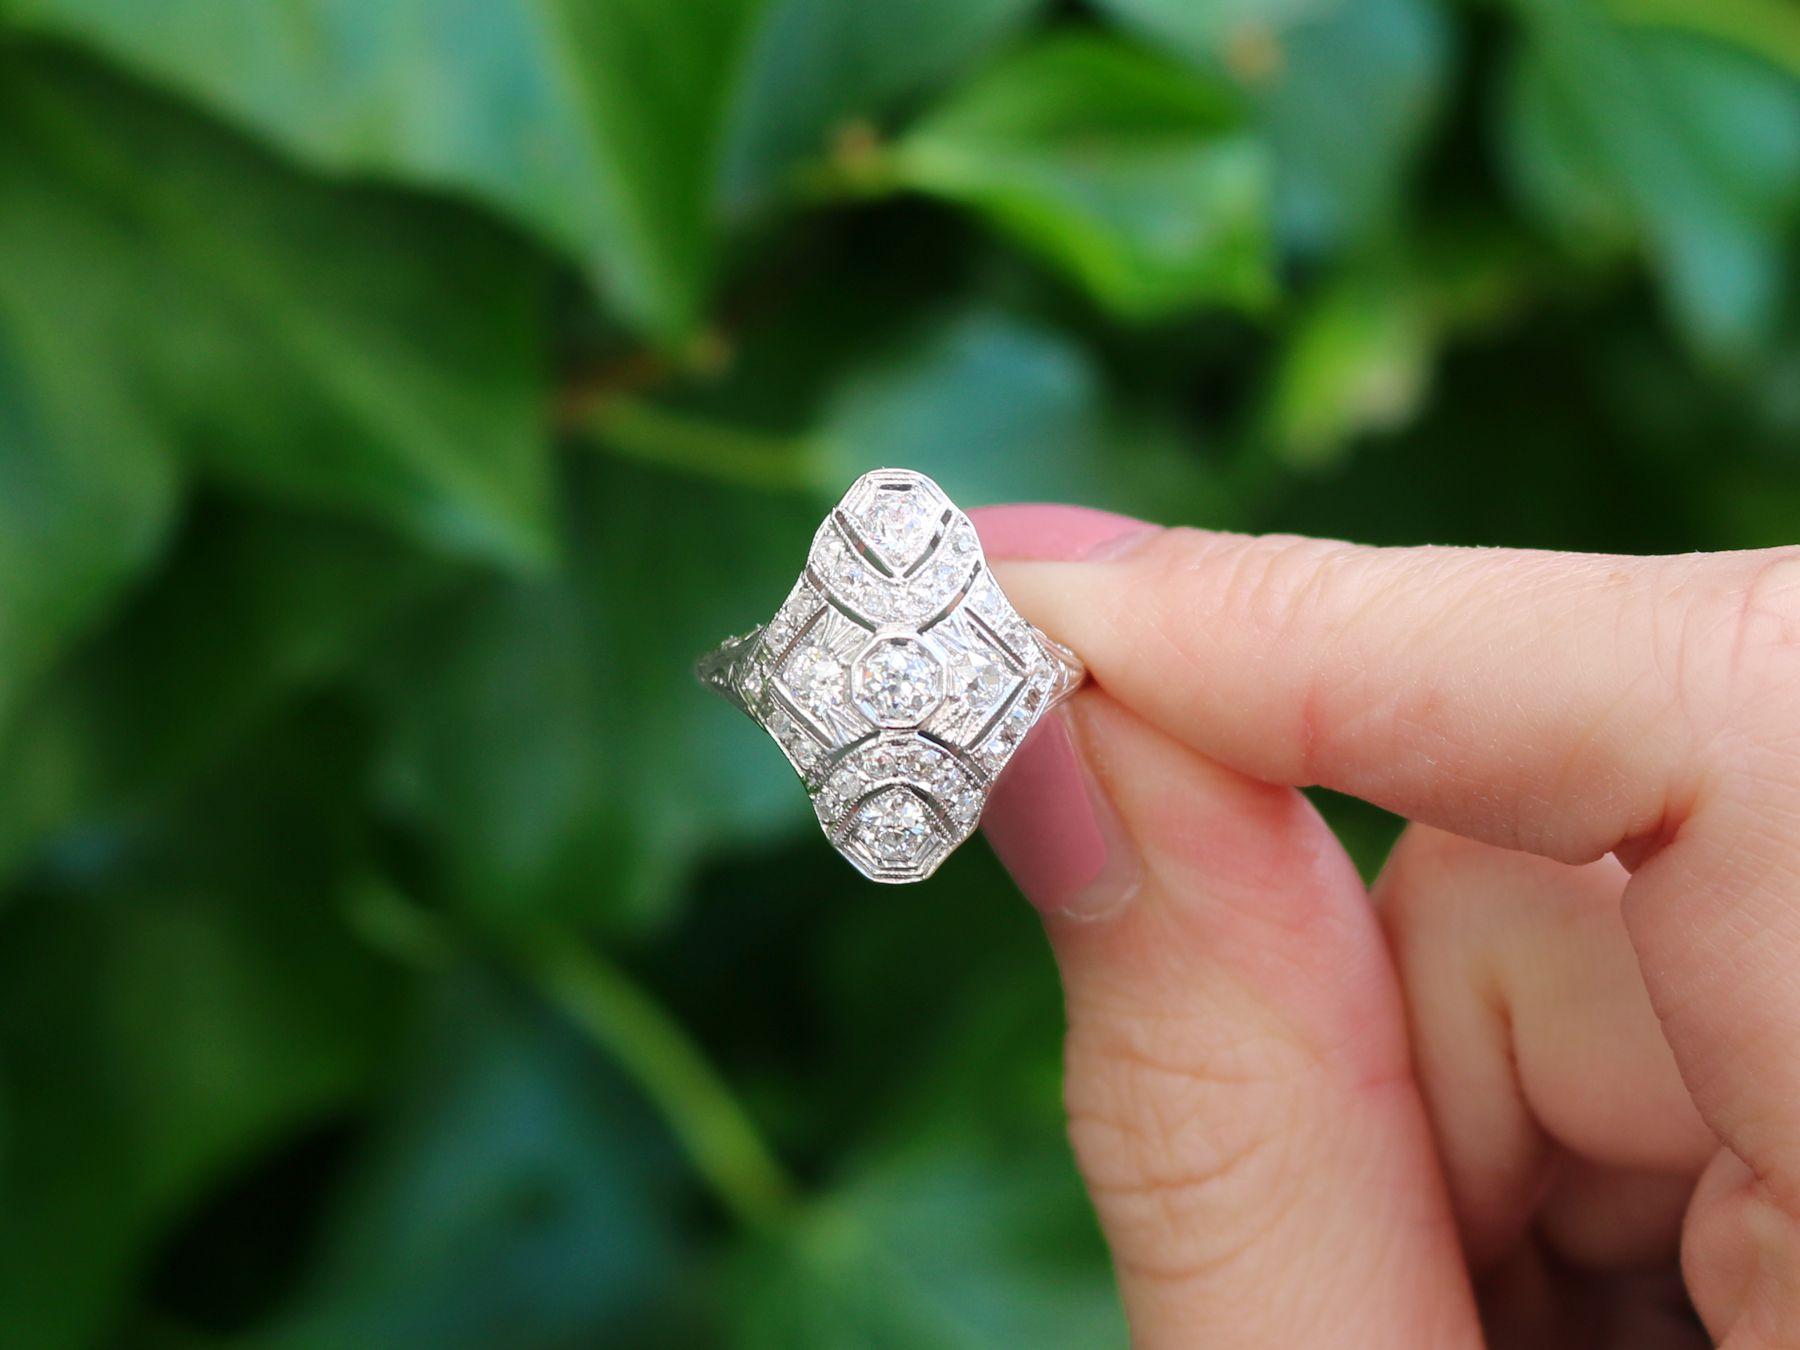 A stunning, fine and impressive 1.18 carat diamond and 14 karat white gold dress ring; part of our diverse antique jewelry and estate jewelry collections.

This stunning, fine and impressive diamond ring has been crafted in 14k white gold.

The